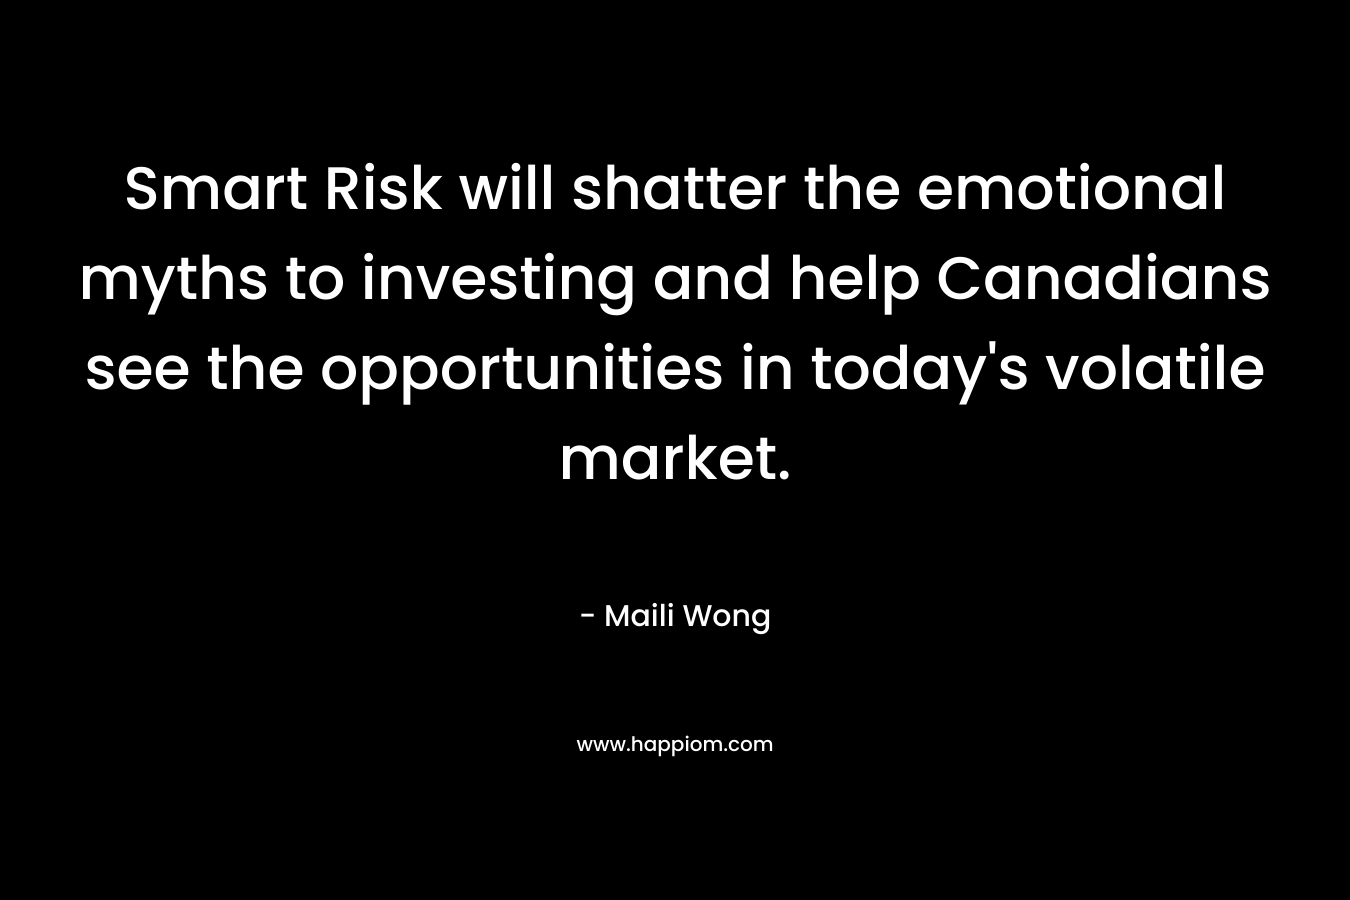 Smart Risk will shatter the emotional myths to investing and help Canadians see the opportunities in today’s volatile market. – Maili Wong